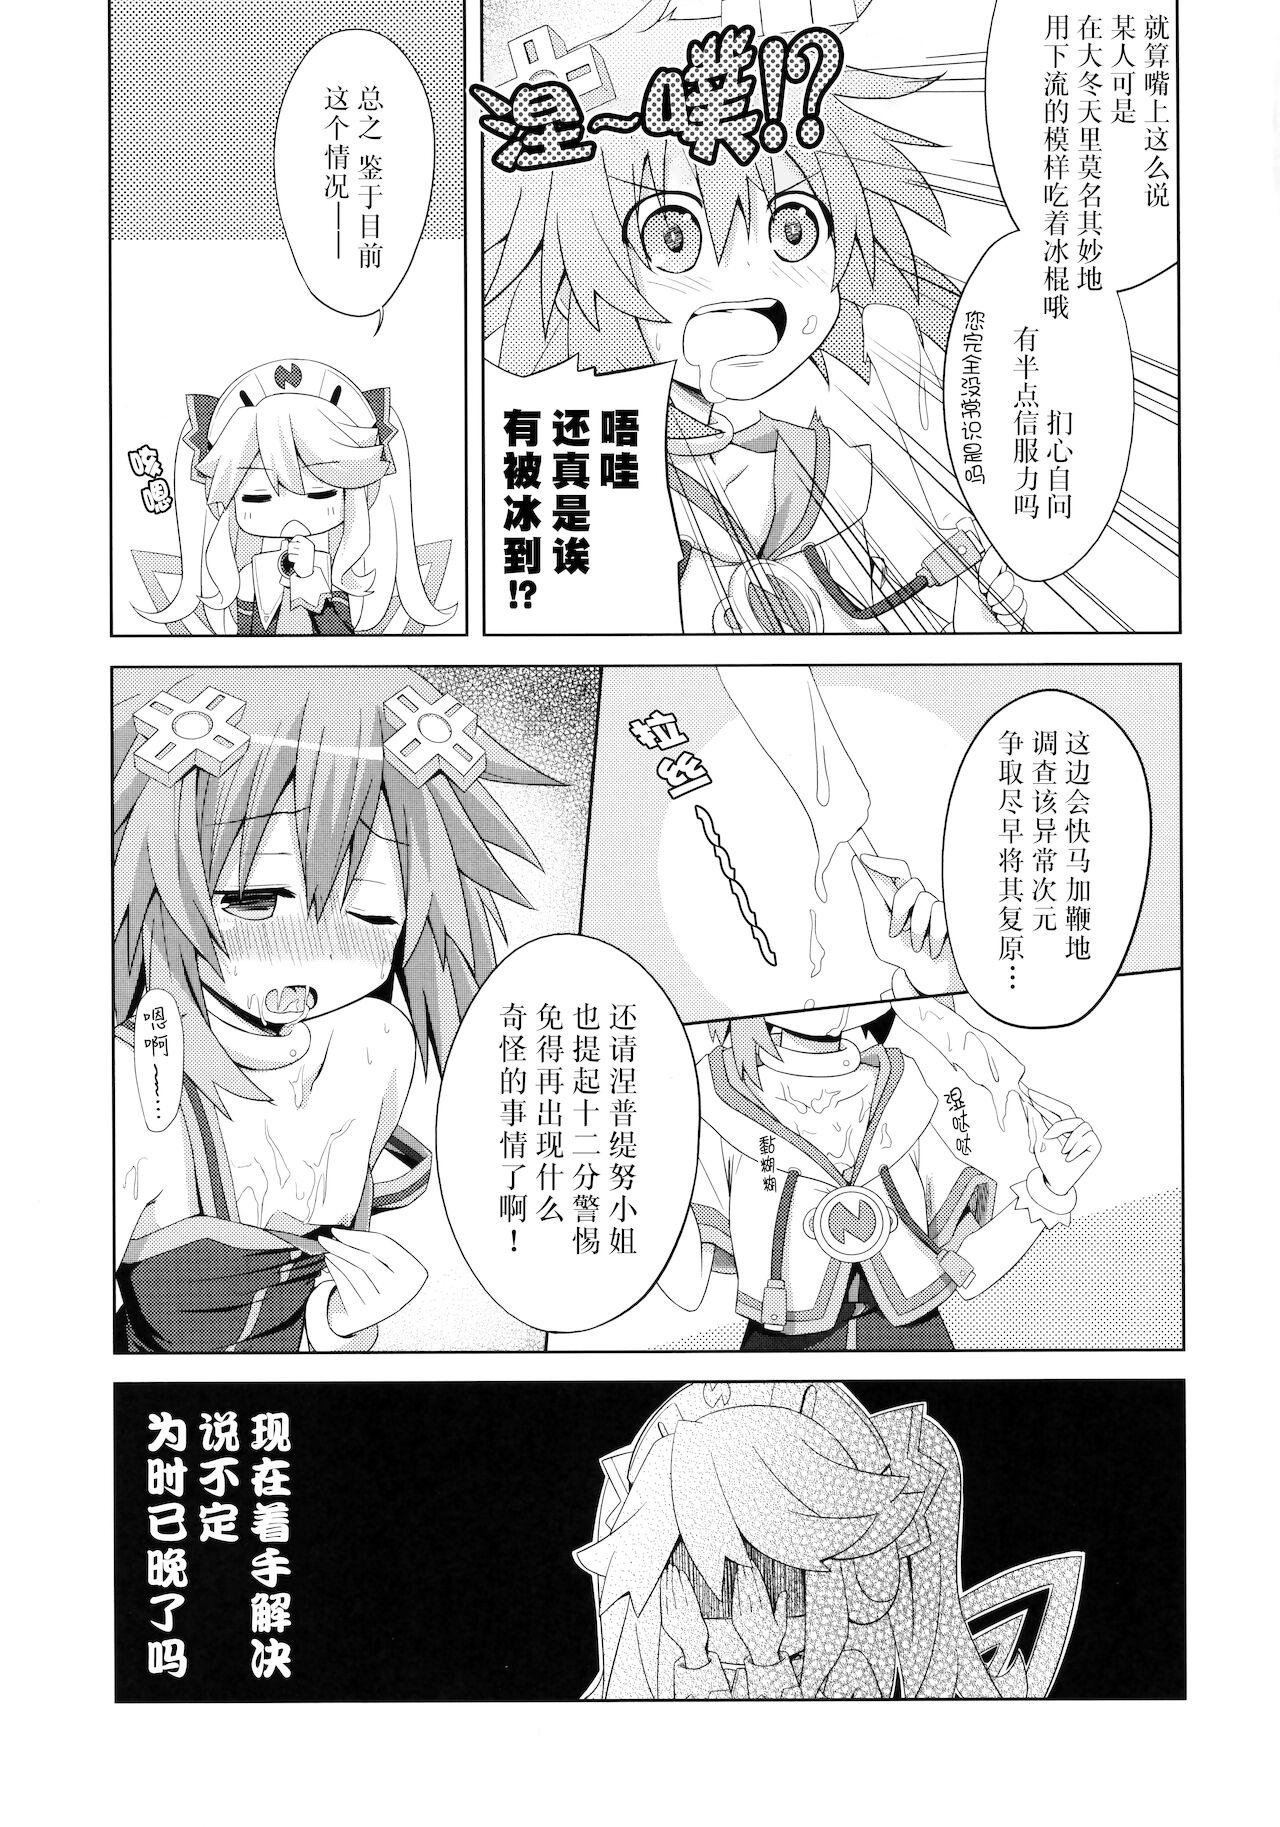 Petite Porn A certain Nepgear was harmed in the making of this doujinshi - Hyperdimension neptunia | choujigen game neptune Gay Friend - Page 6